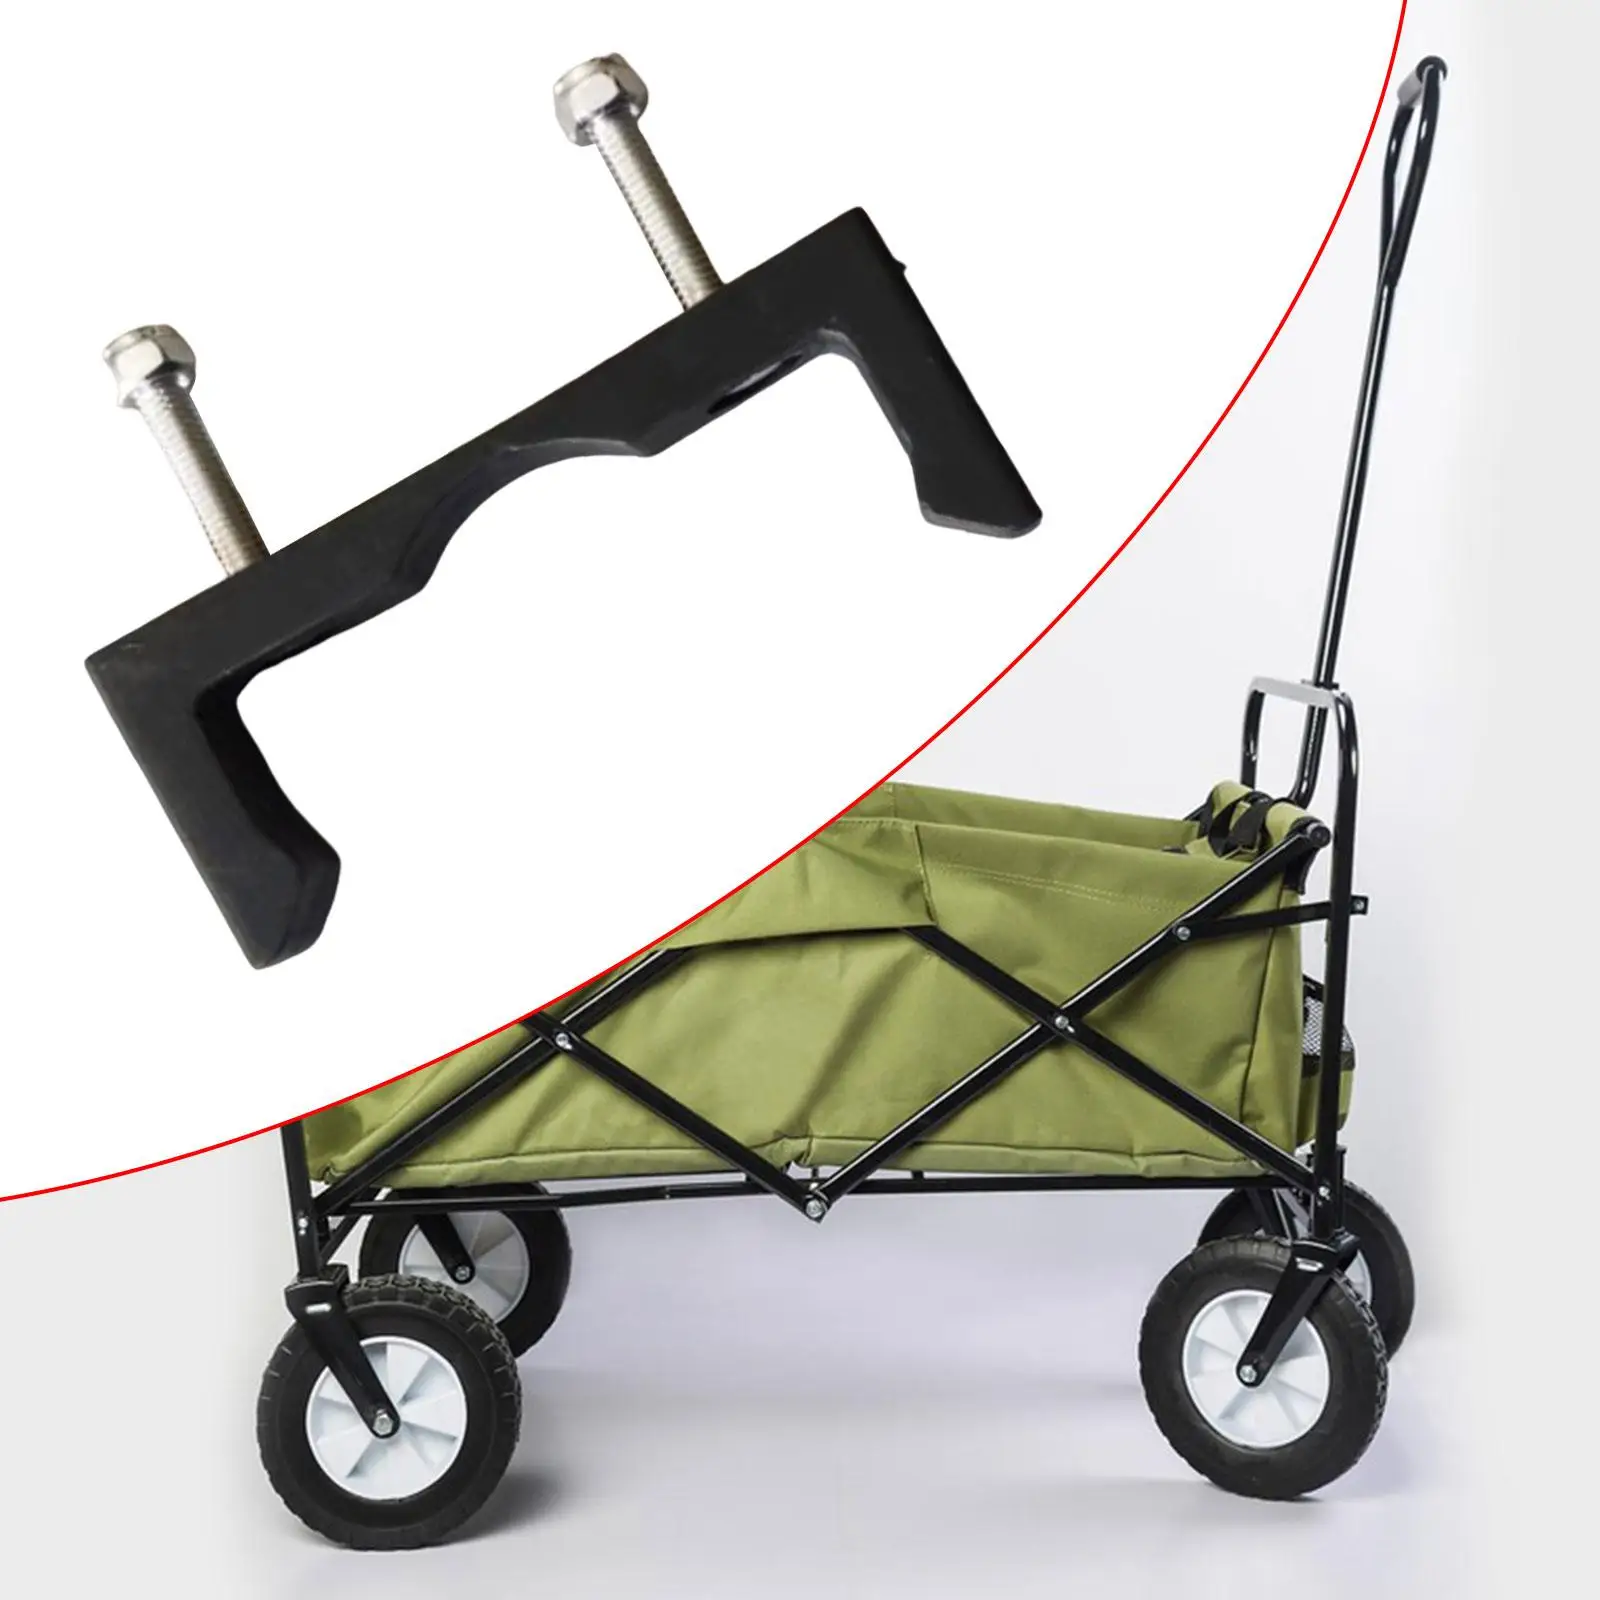 Utility Wagon Cart Pull Push Handle Fixed Buckle Folding Utility Wagon Pull Push Handle Fixed Buckle for Garden Camping Shopping